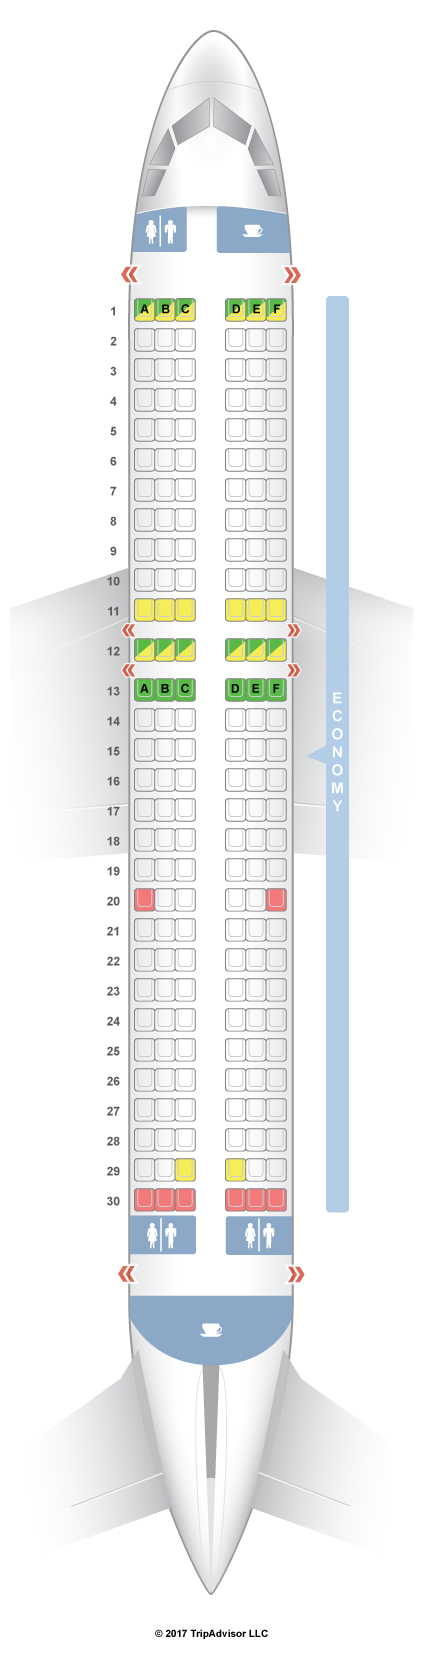 wizz air seat selection is currently not available